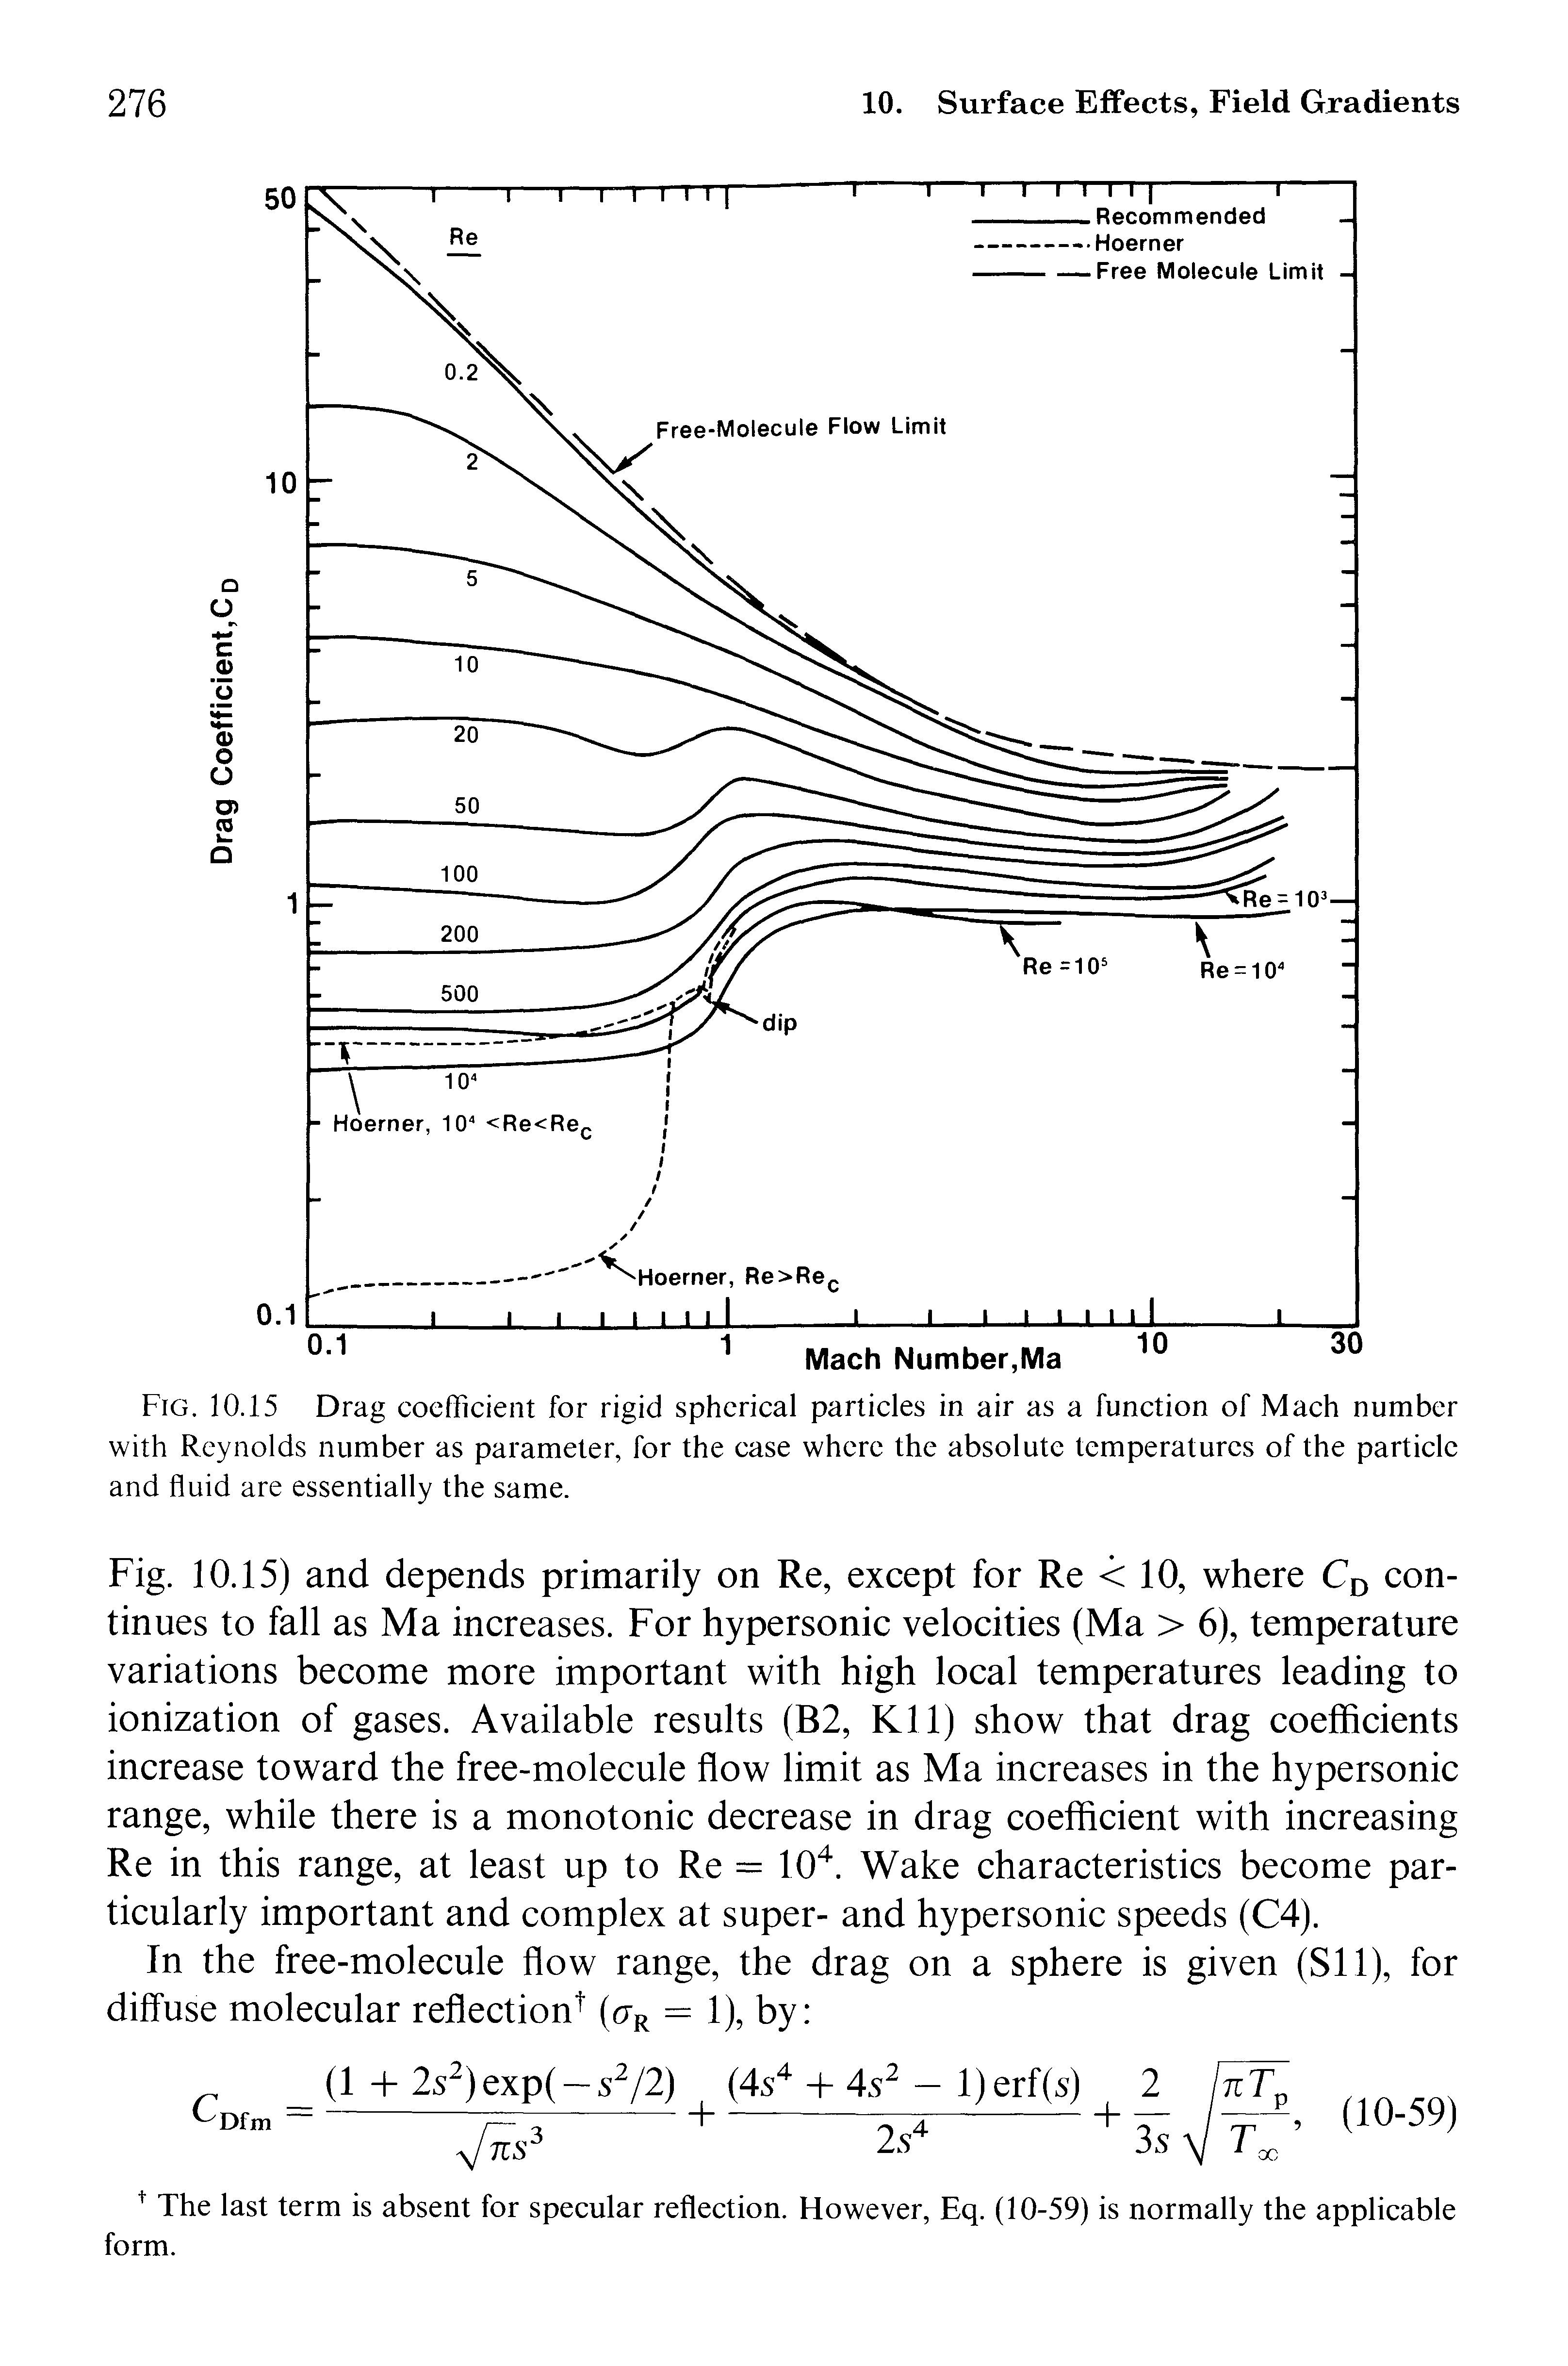 Fig. 10.15 Drag coefficient for rigid spherical particles in air as a function of Mach number with Reynolds number as parameter, for the case where the absolute temperatures of the particle and fluid are essentially the same.